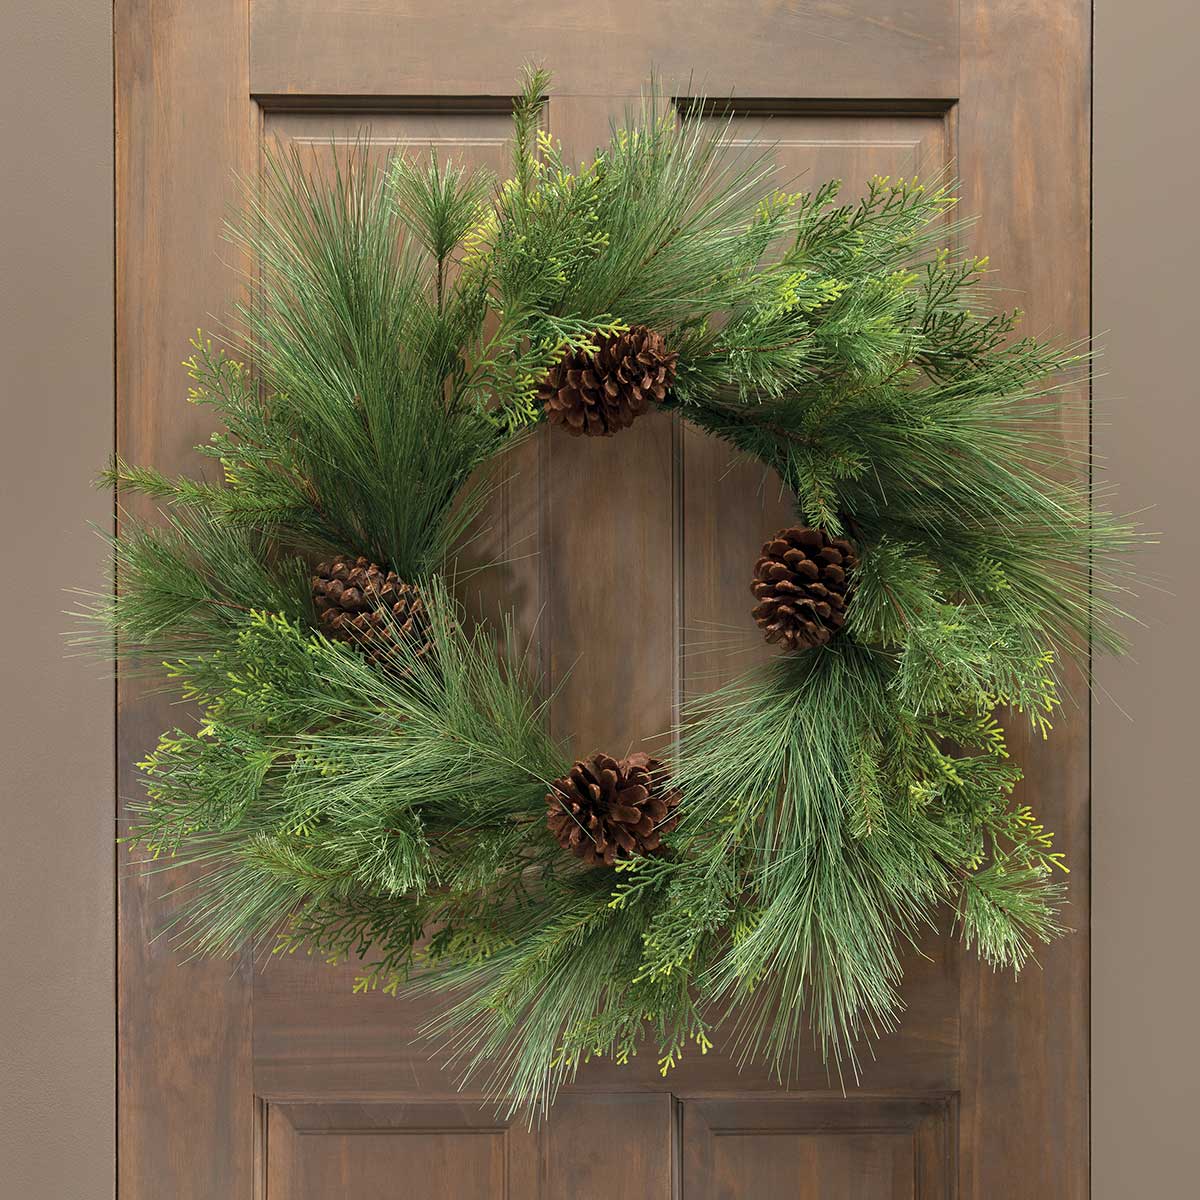 WREATH WHITE PINE/CEDAR 28IN (INNER RING 13IN) - Click Image to Close